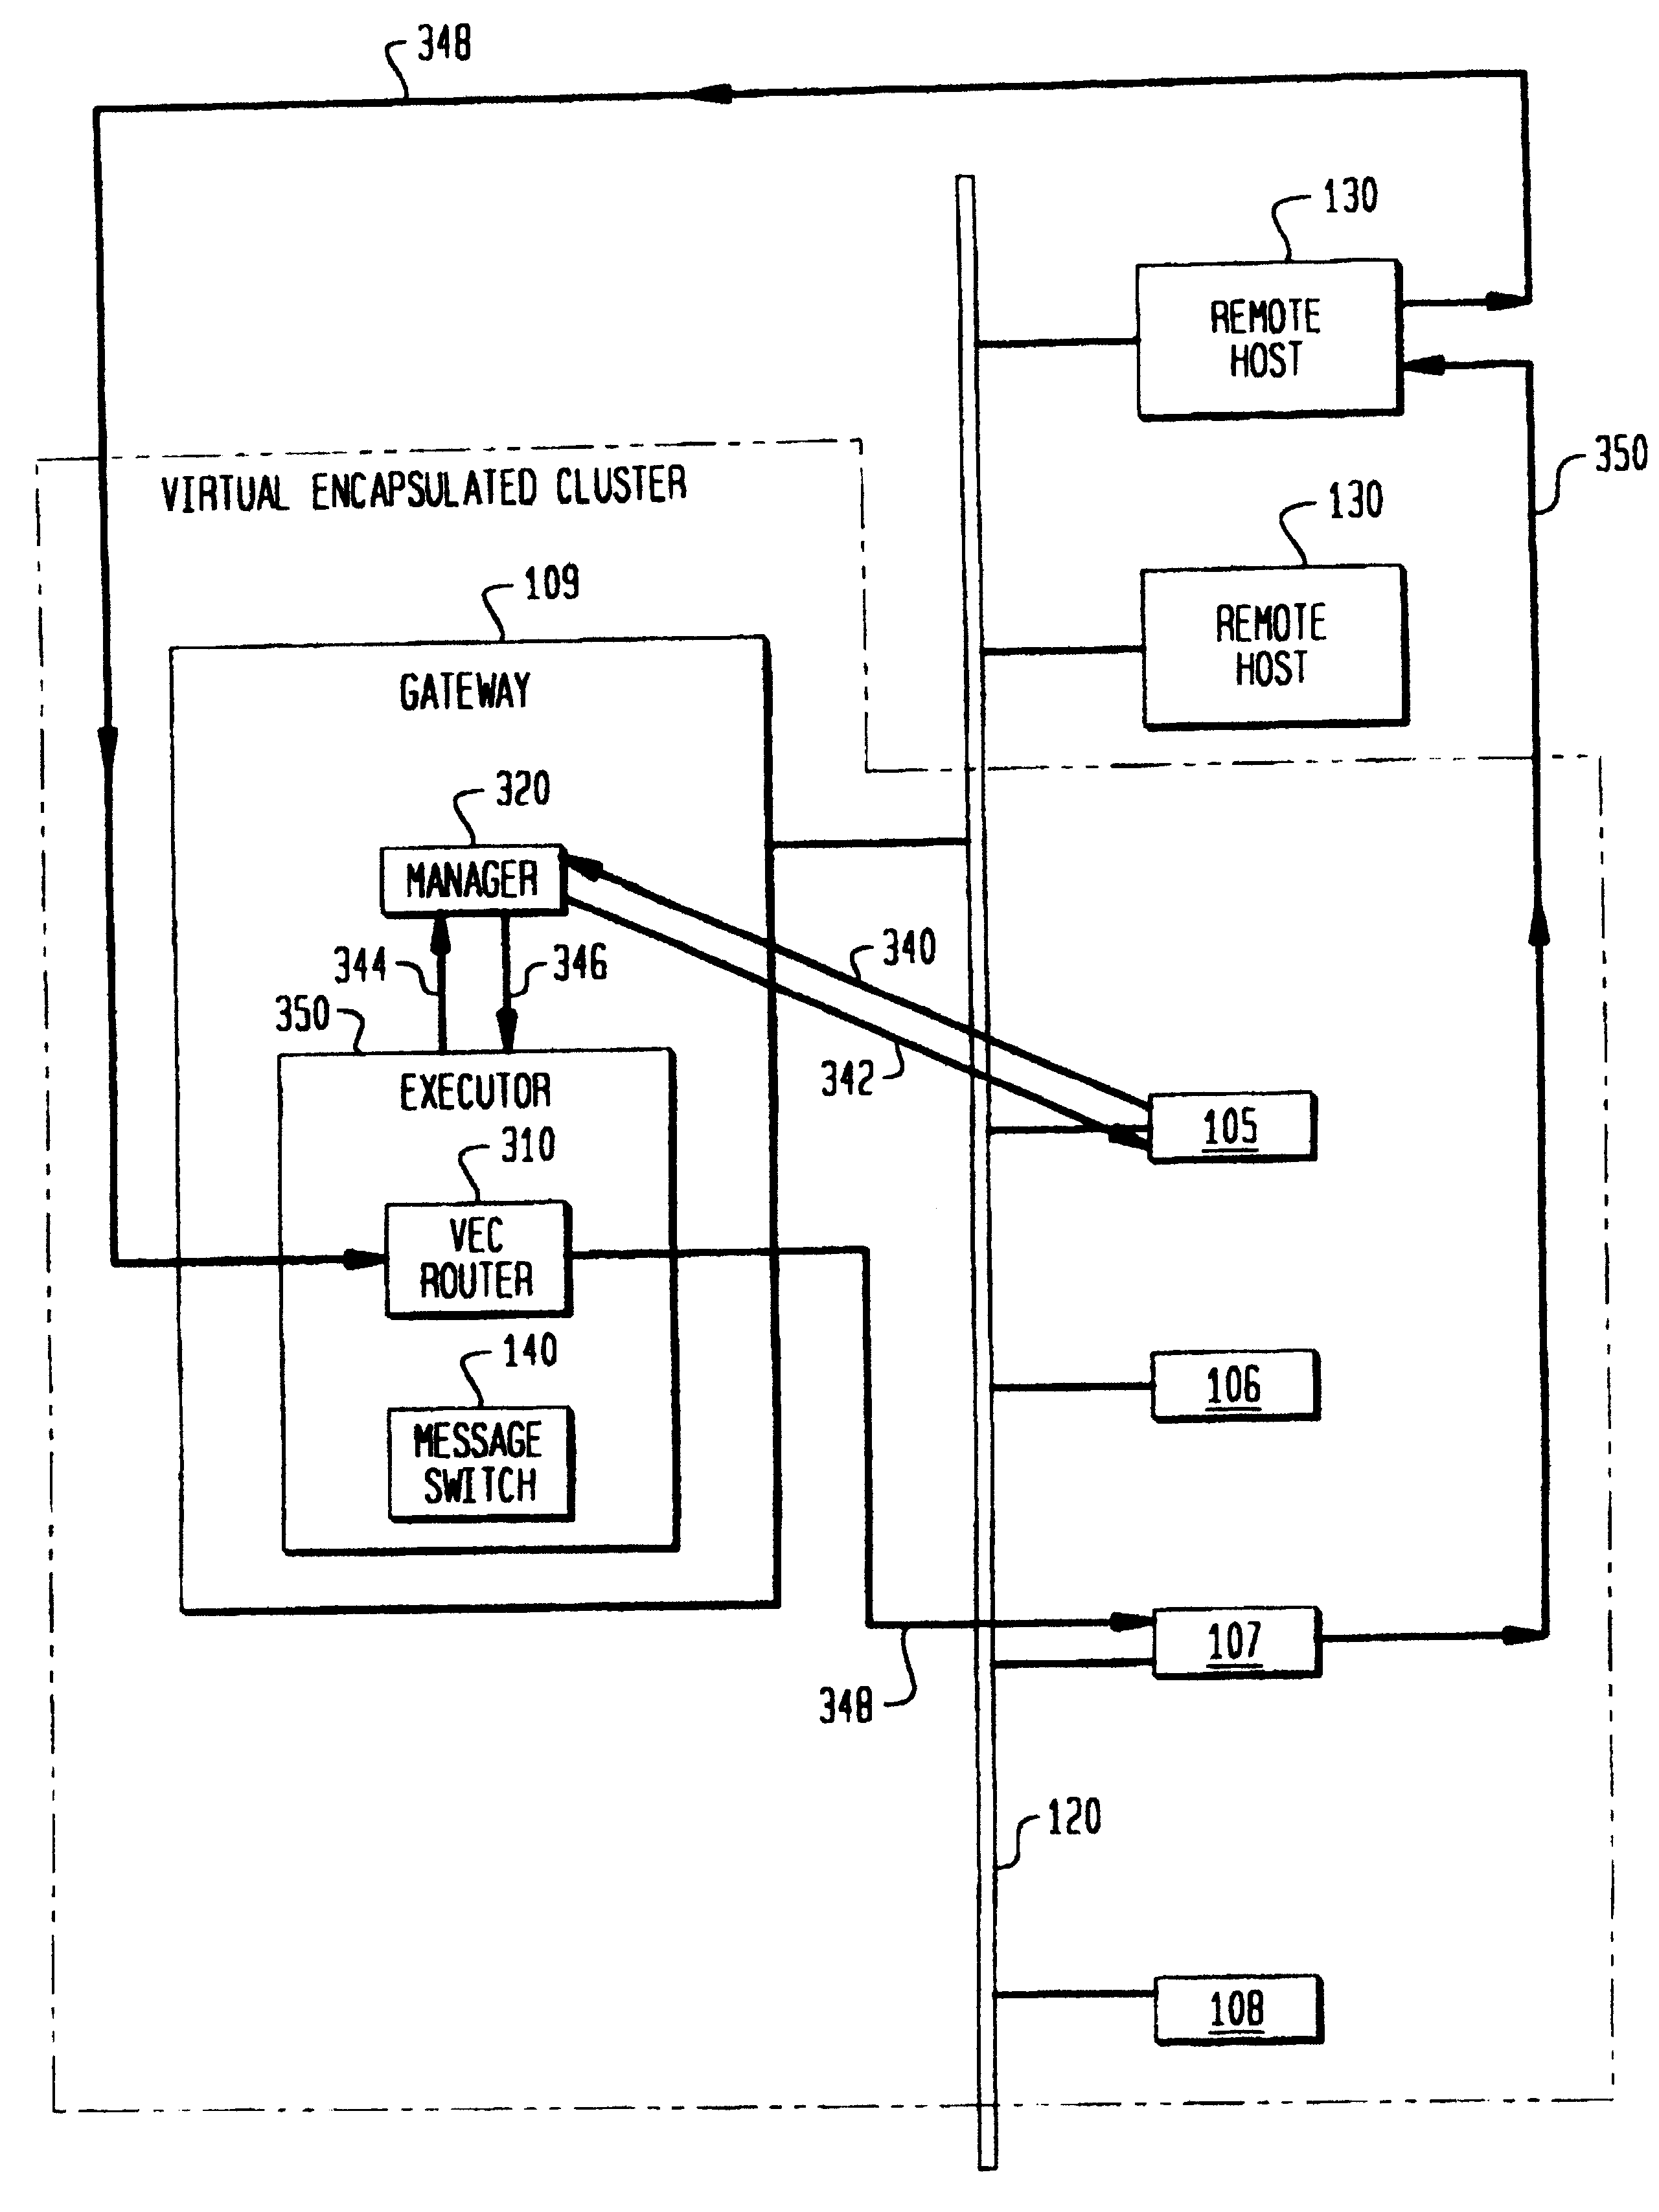 System and method for providing dynamically alterable computer clusters for message routing